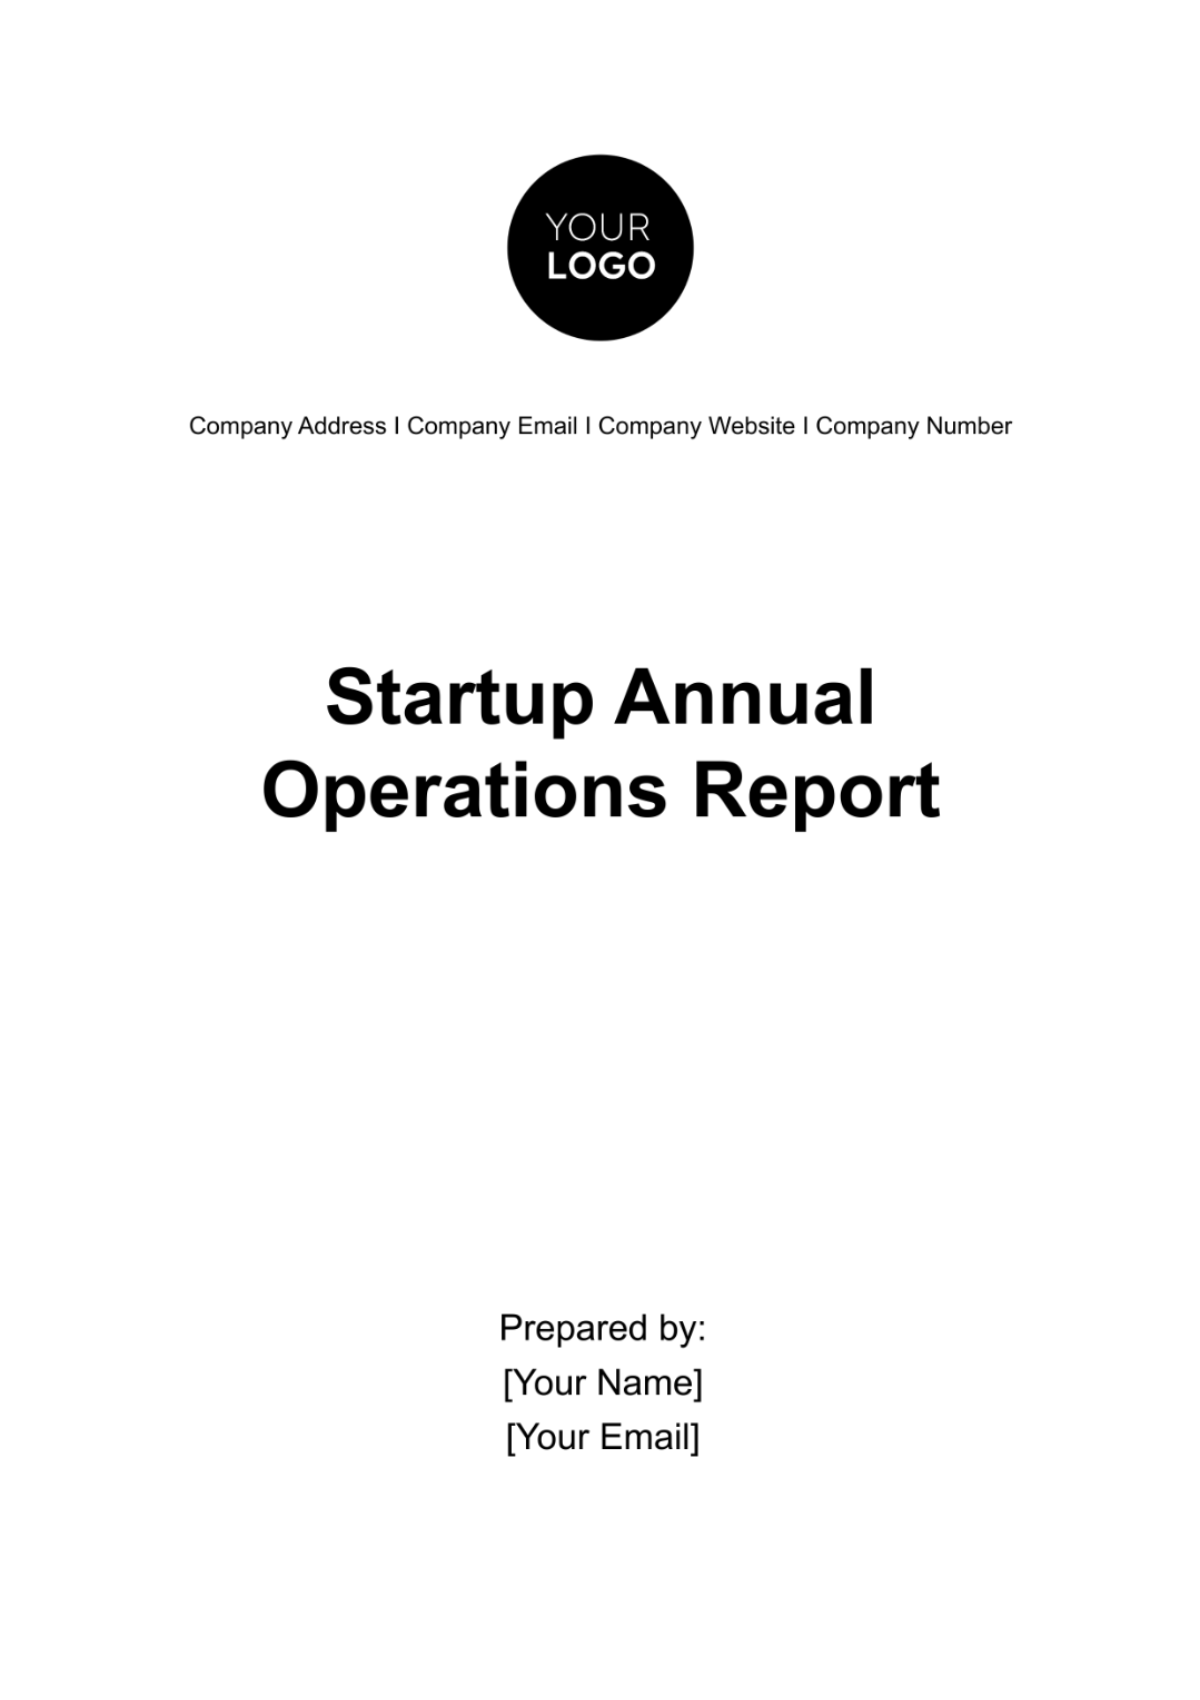 Startup Annual Operations Report Template